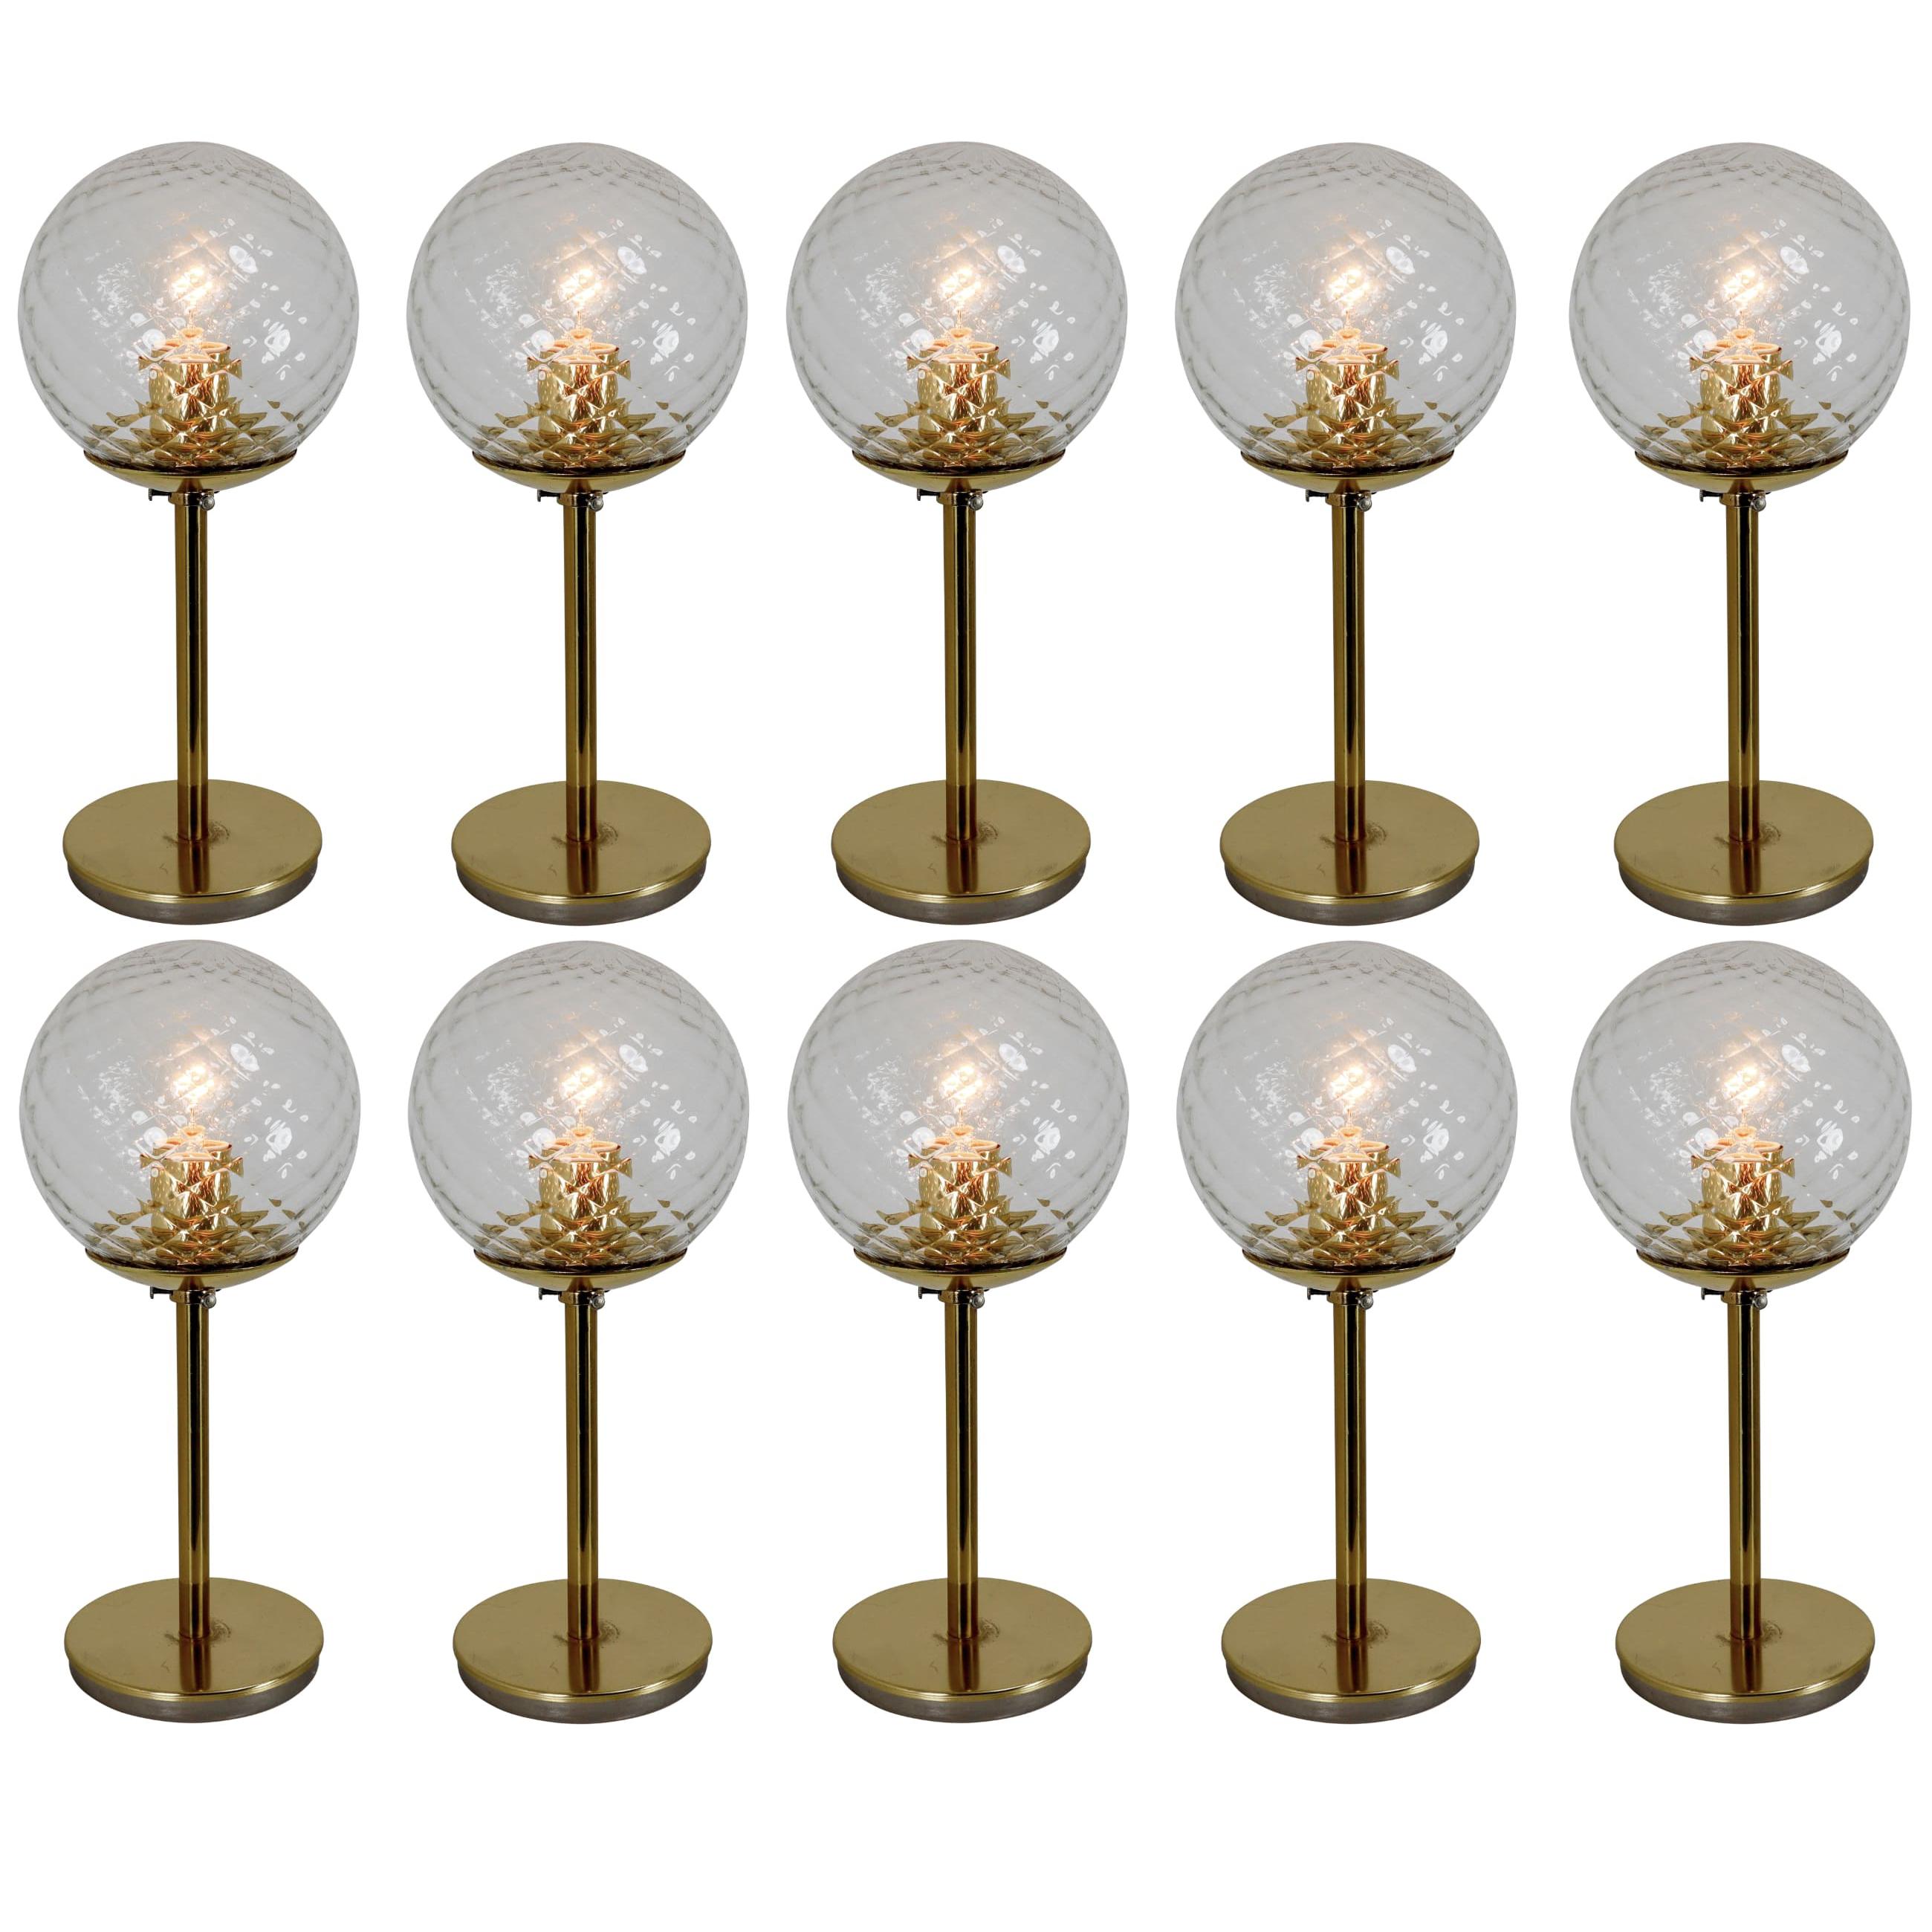 Set of Ten Mid-Century Modernist Brass Table Lamps with Structure Glass, 1970s